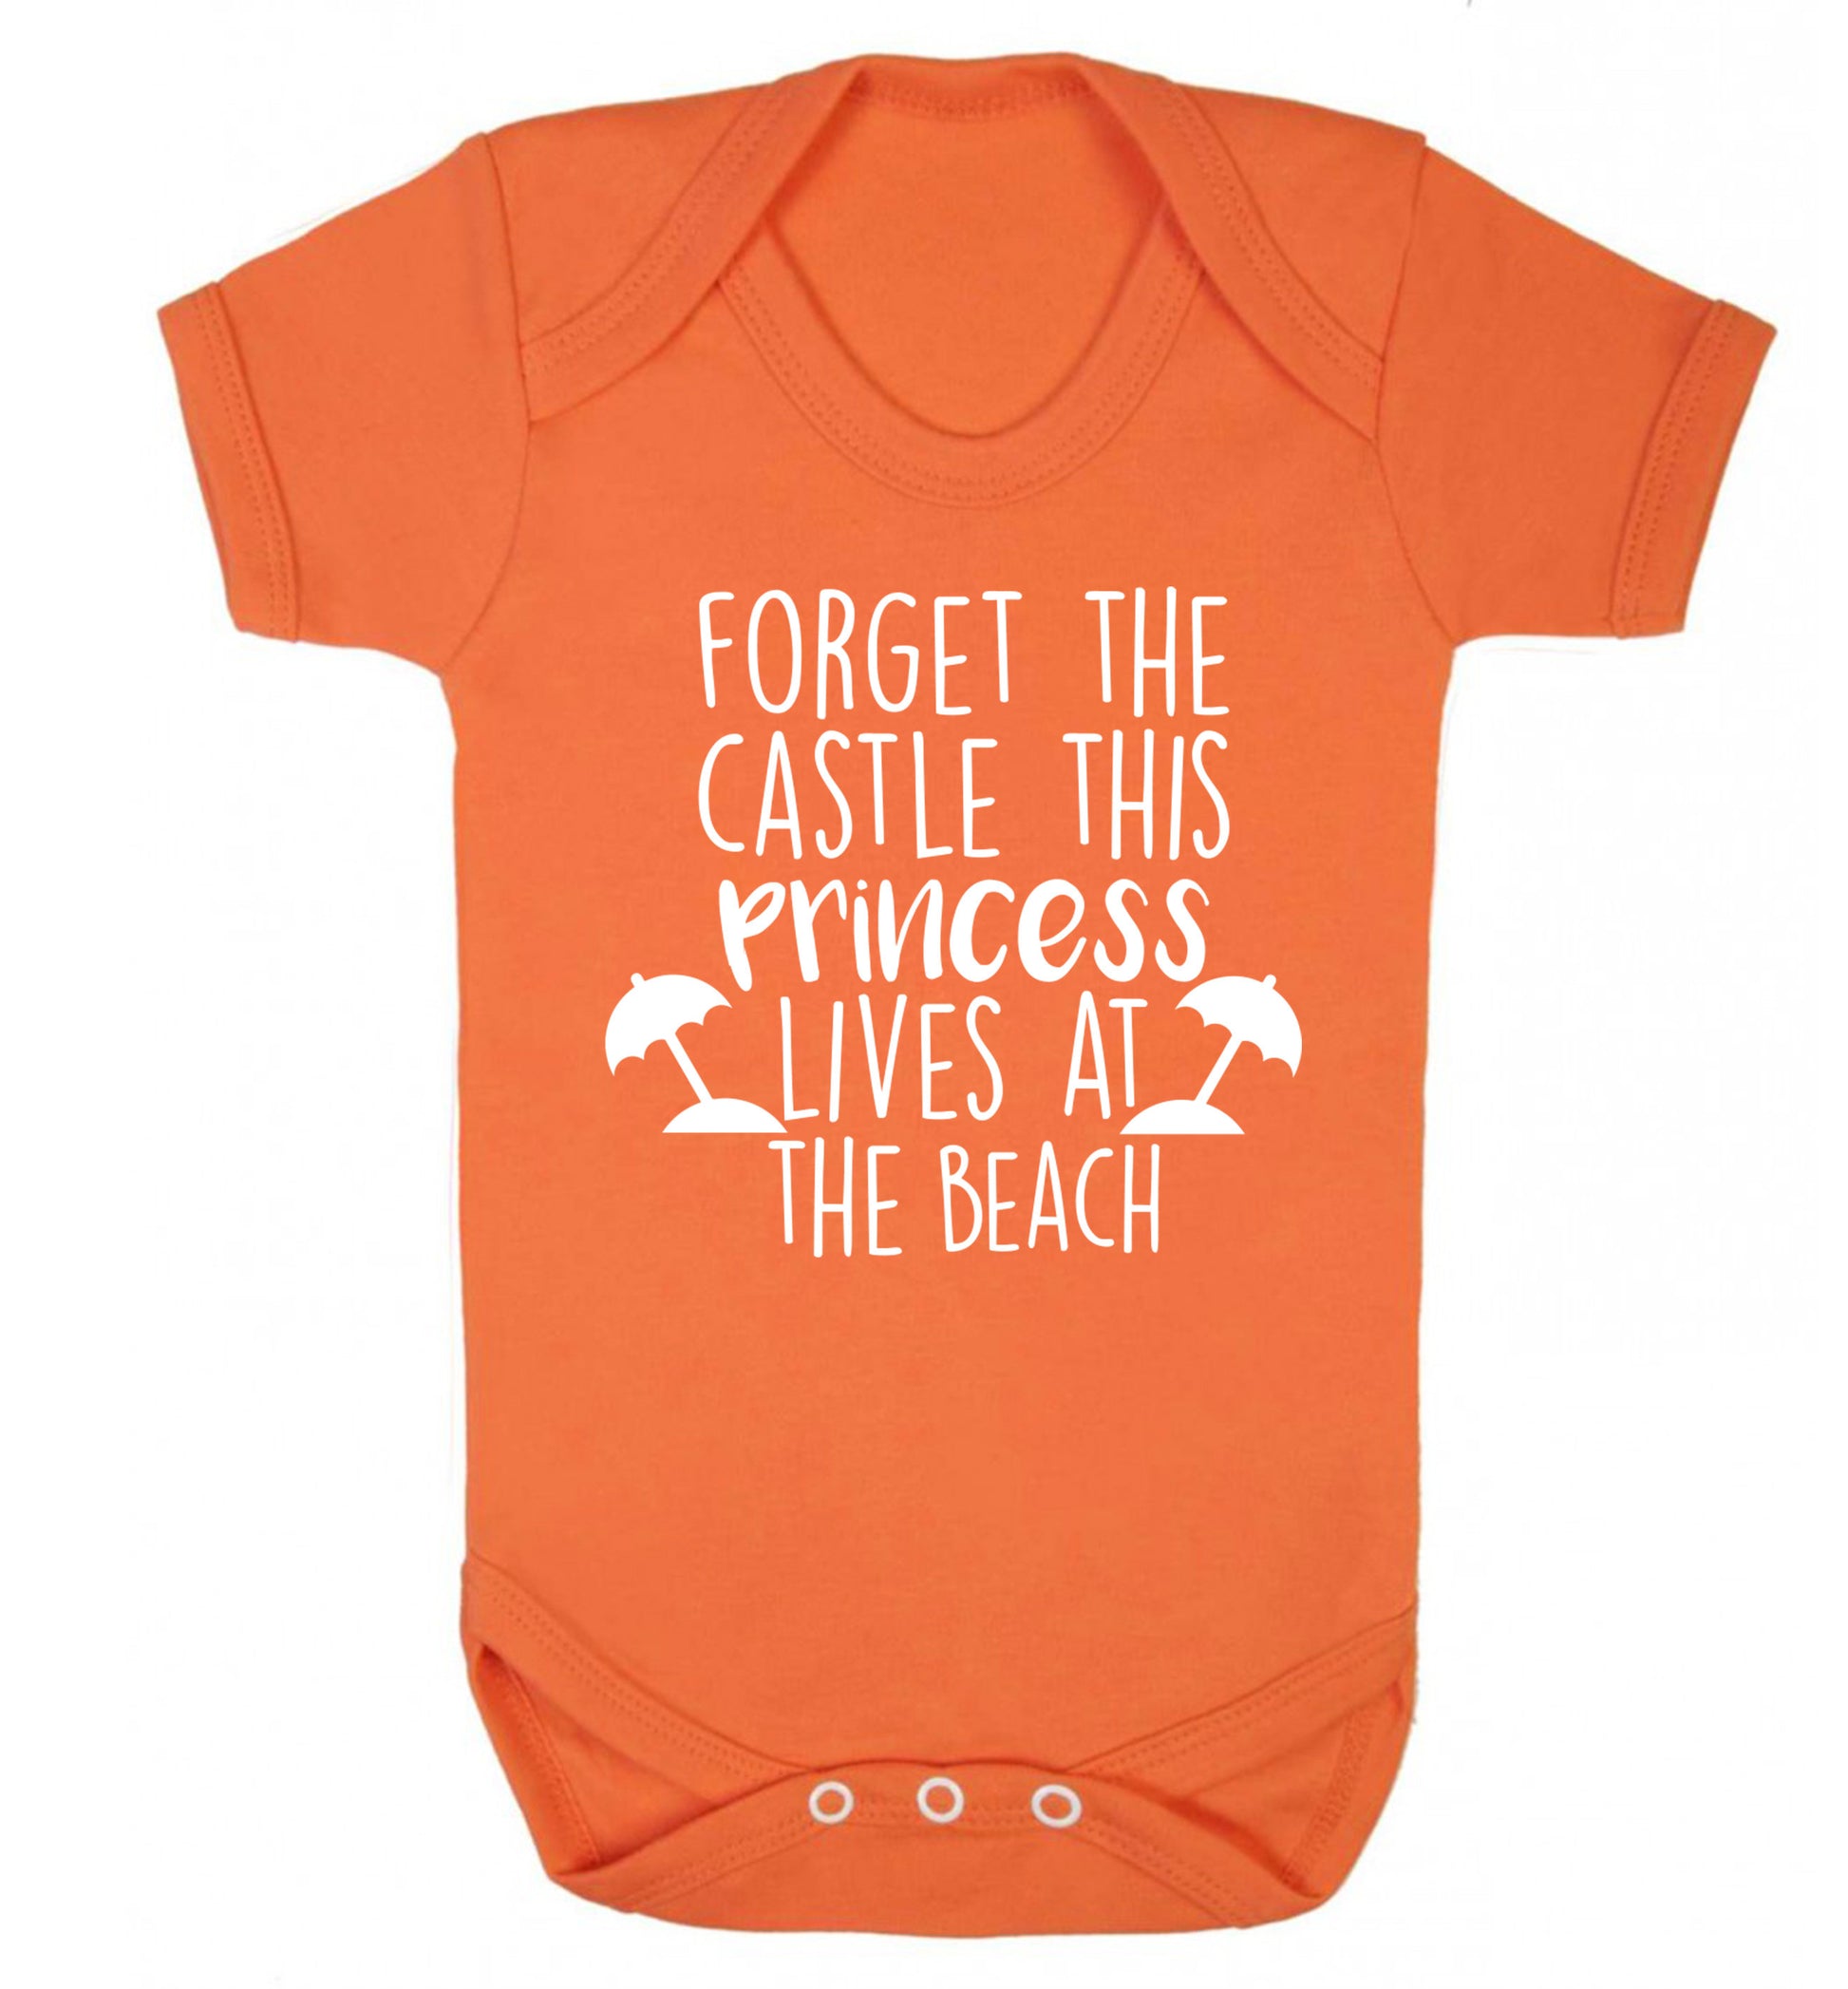 Forget the castle this princess lives at the beach Baby Vest orange 18-24 months